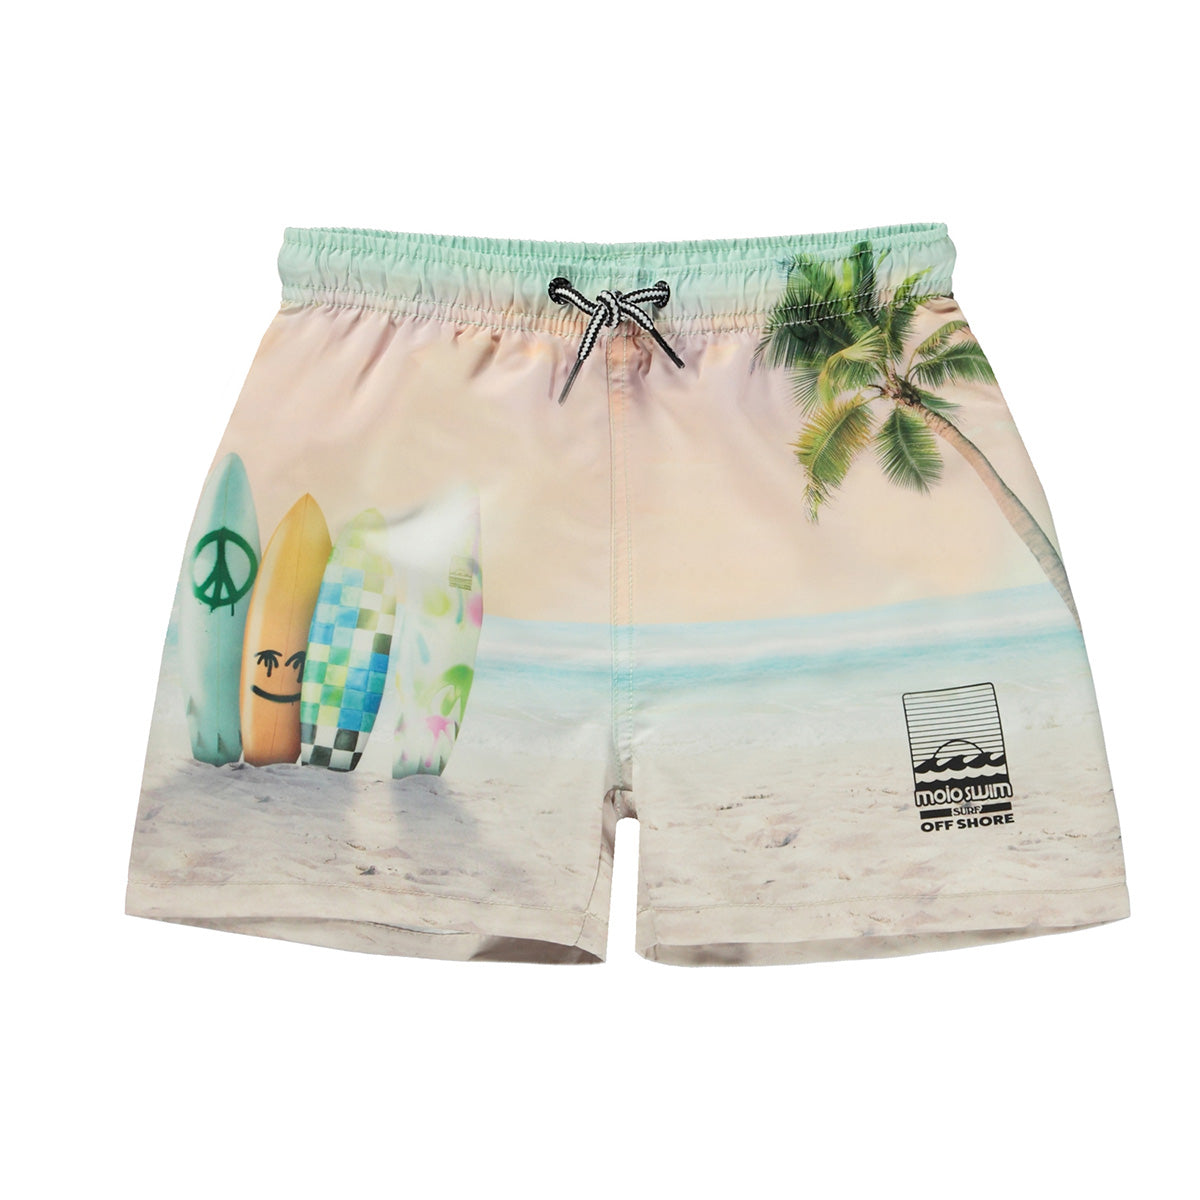 The Niko Swim Shorts from Molo. Swim shorts in light, neutral colors with a placement print of a tropical beach